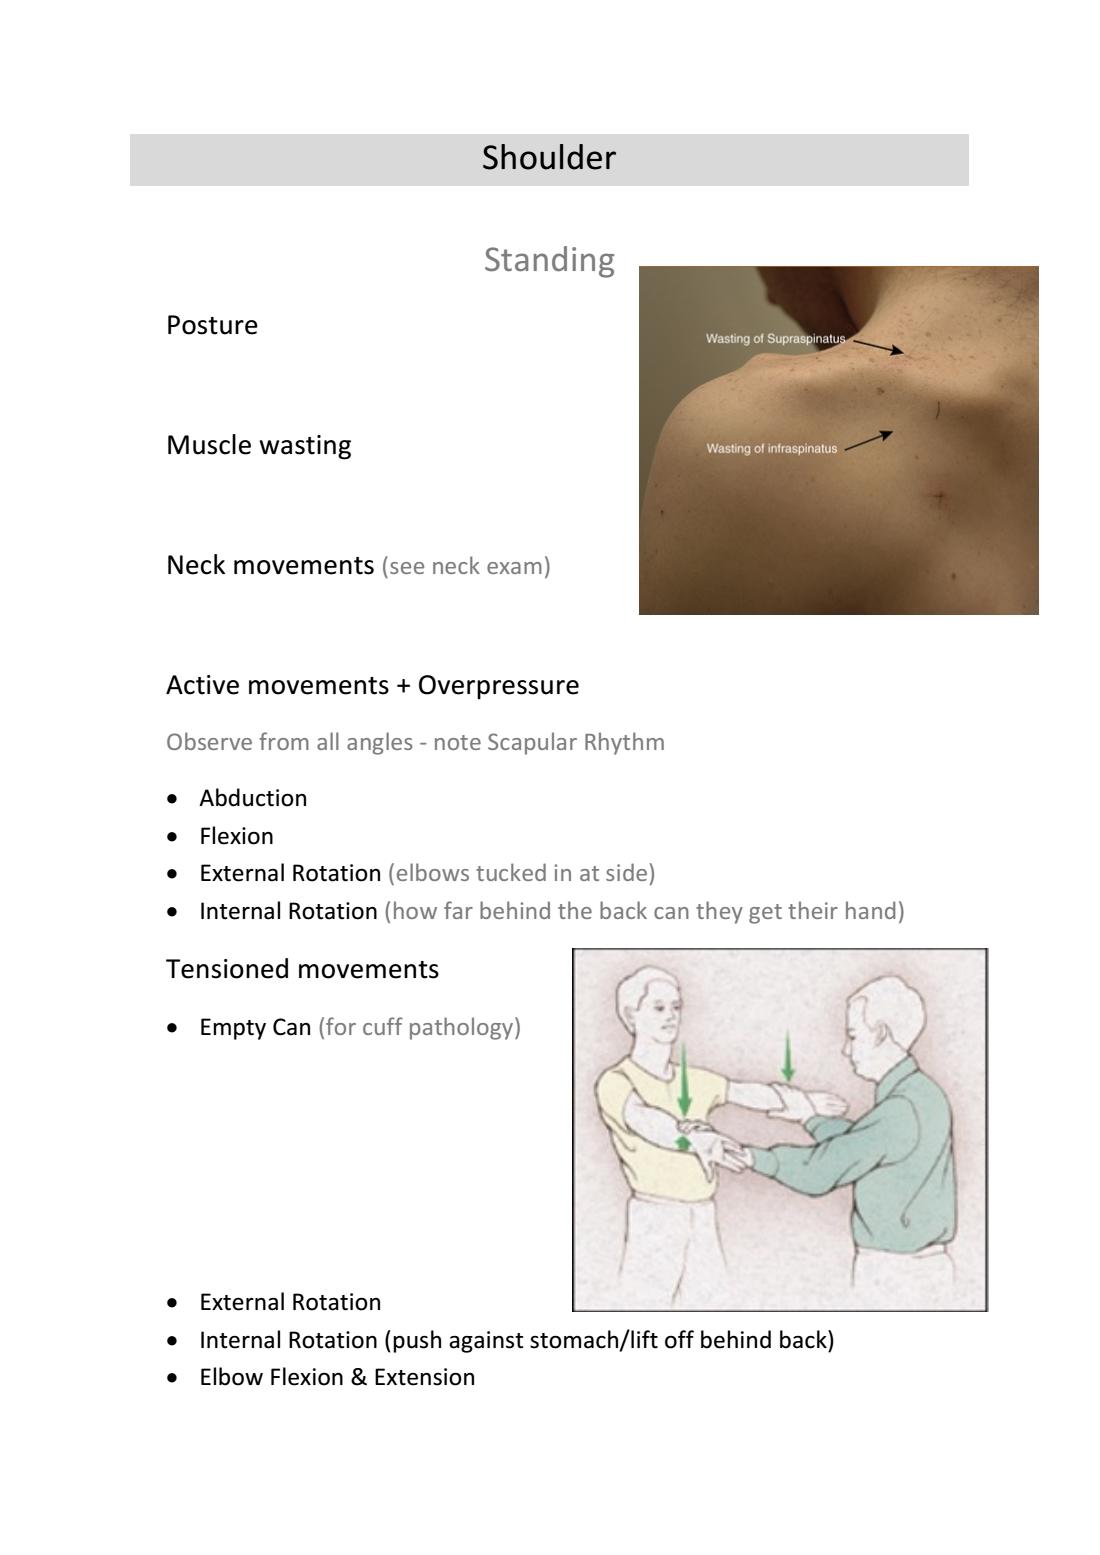 Shoulder Pain  Rotator Cuff Tears  To Operate or  not ?by Dr Lennark Funk Msc, FRCS (Tr & Orth)